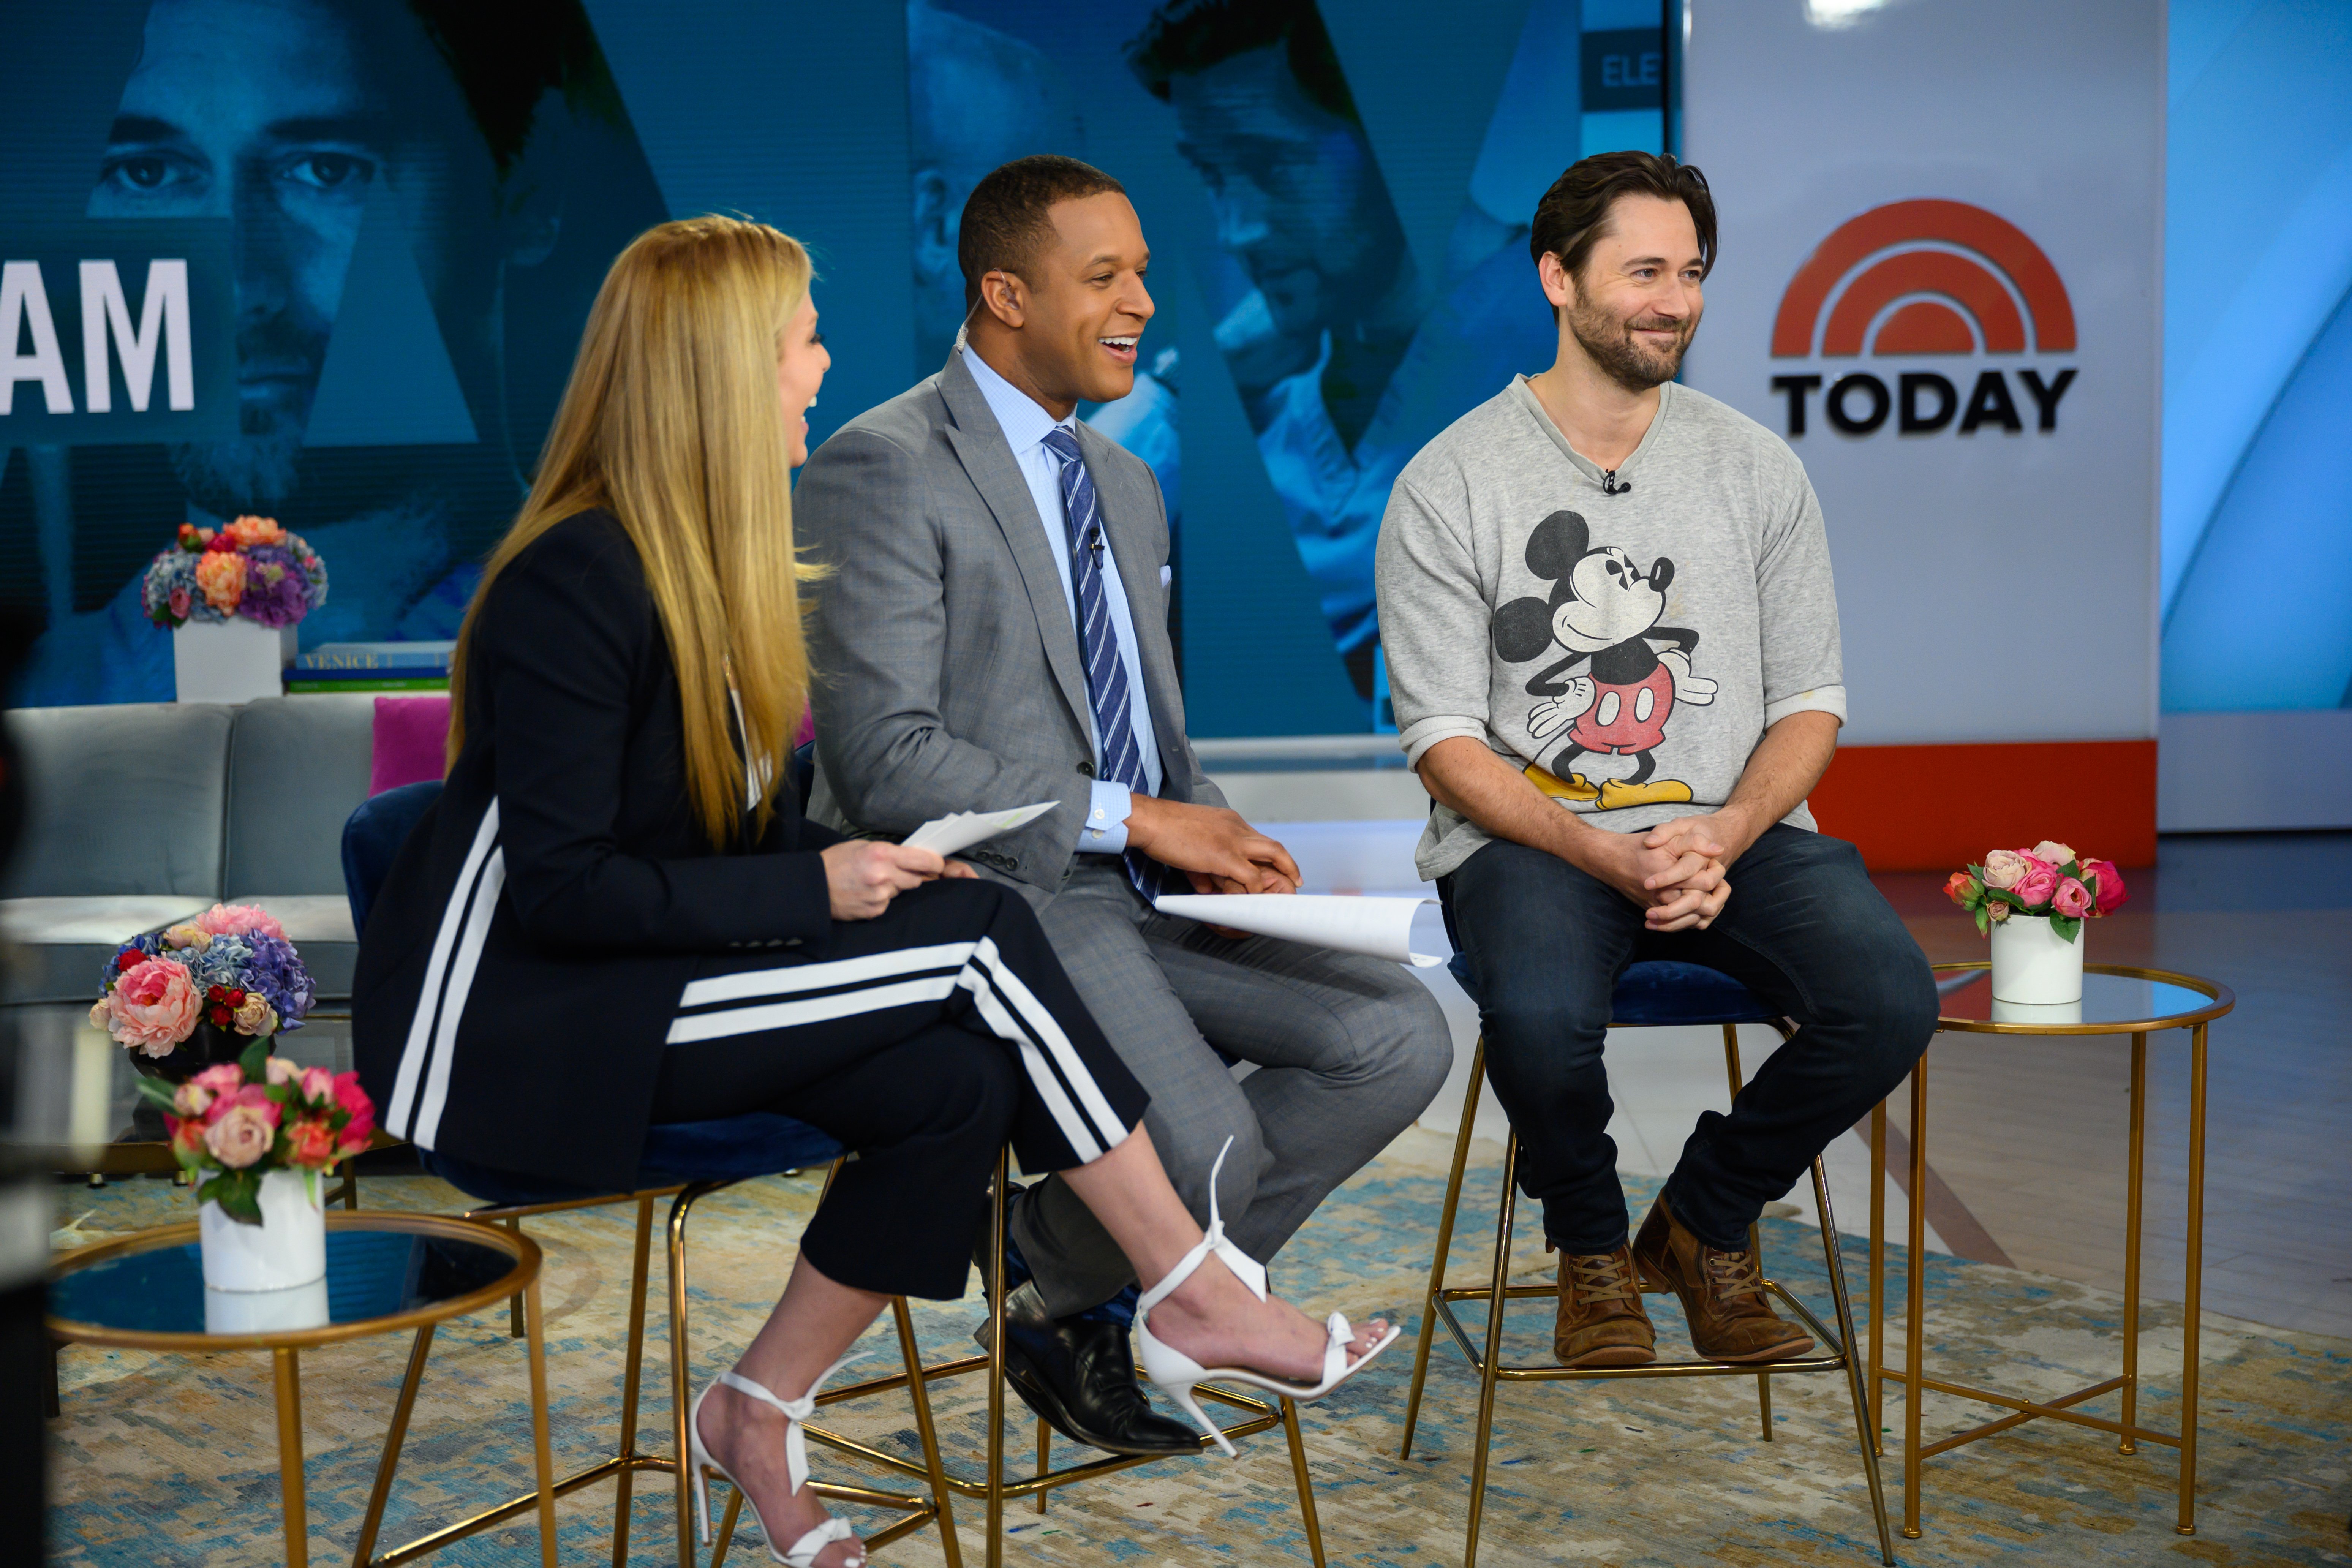 Jill Martin, Craig Melvin and Ryan Eggold on the "Today" show, February 17, 2020. | Source: Getty Images